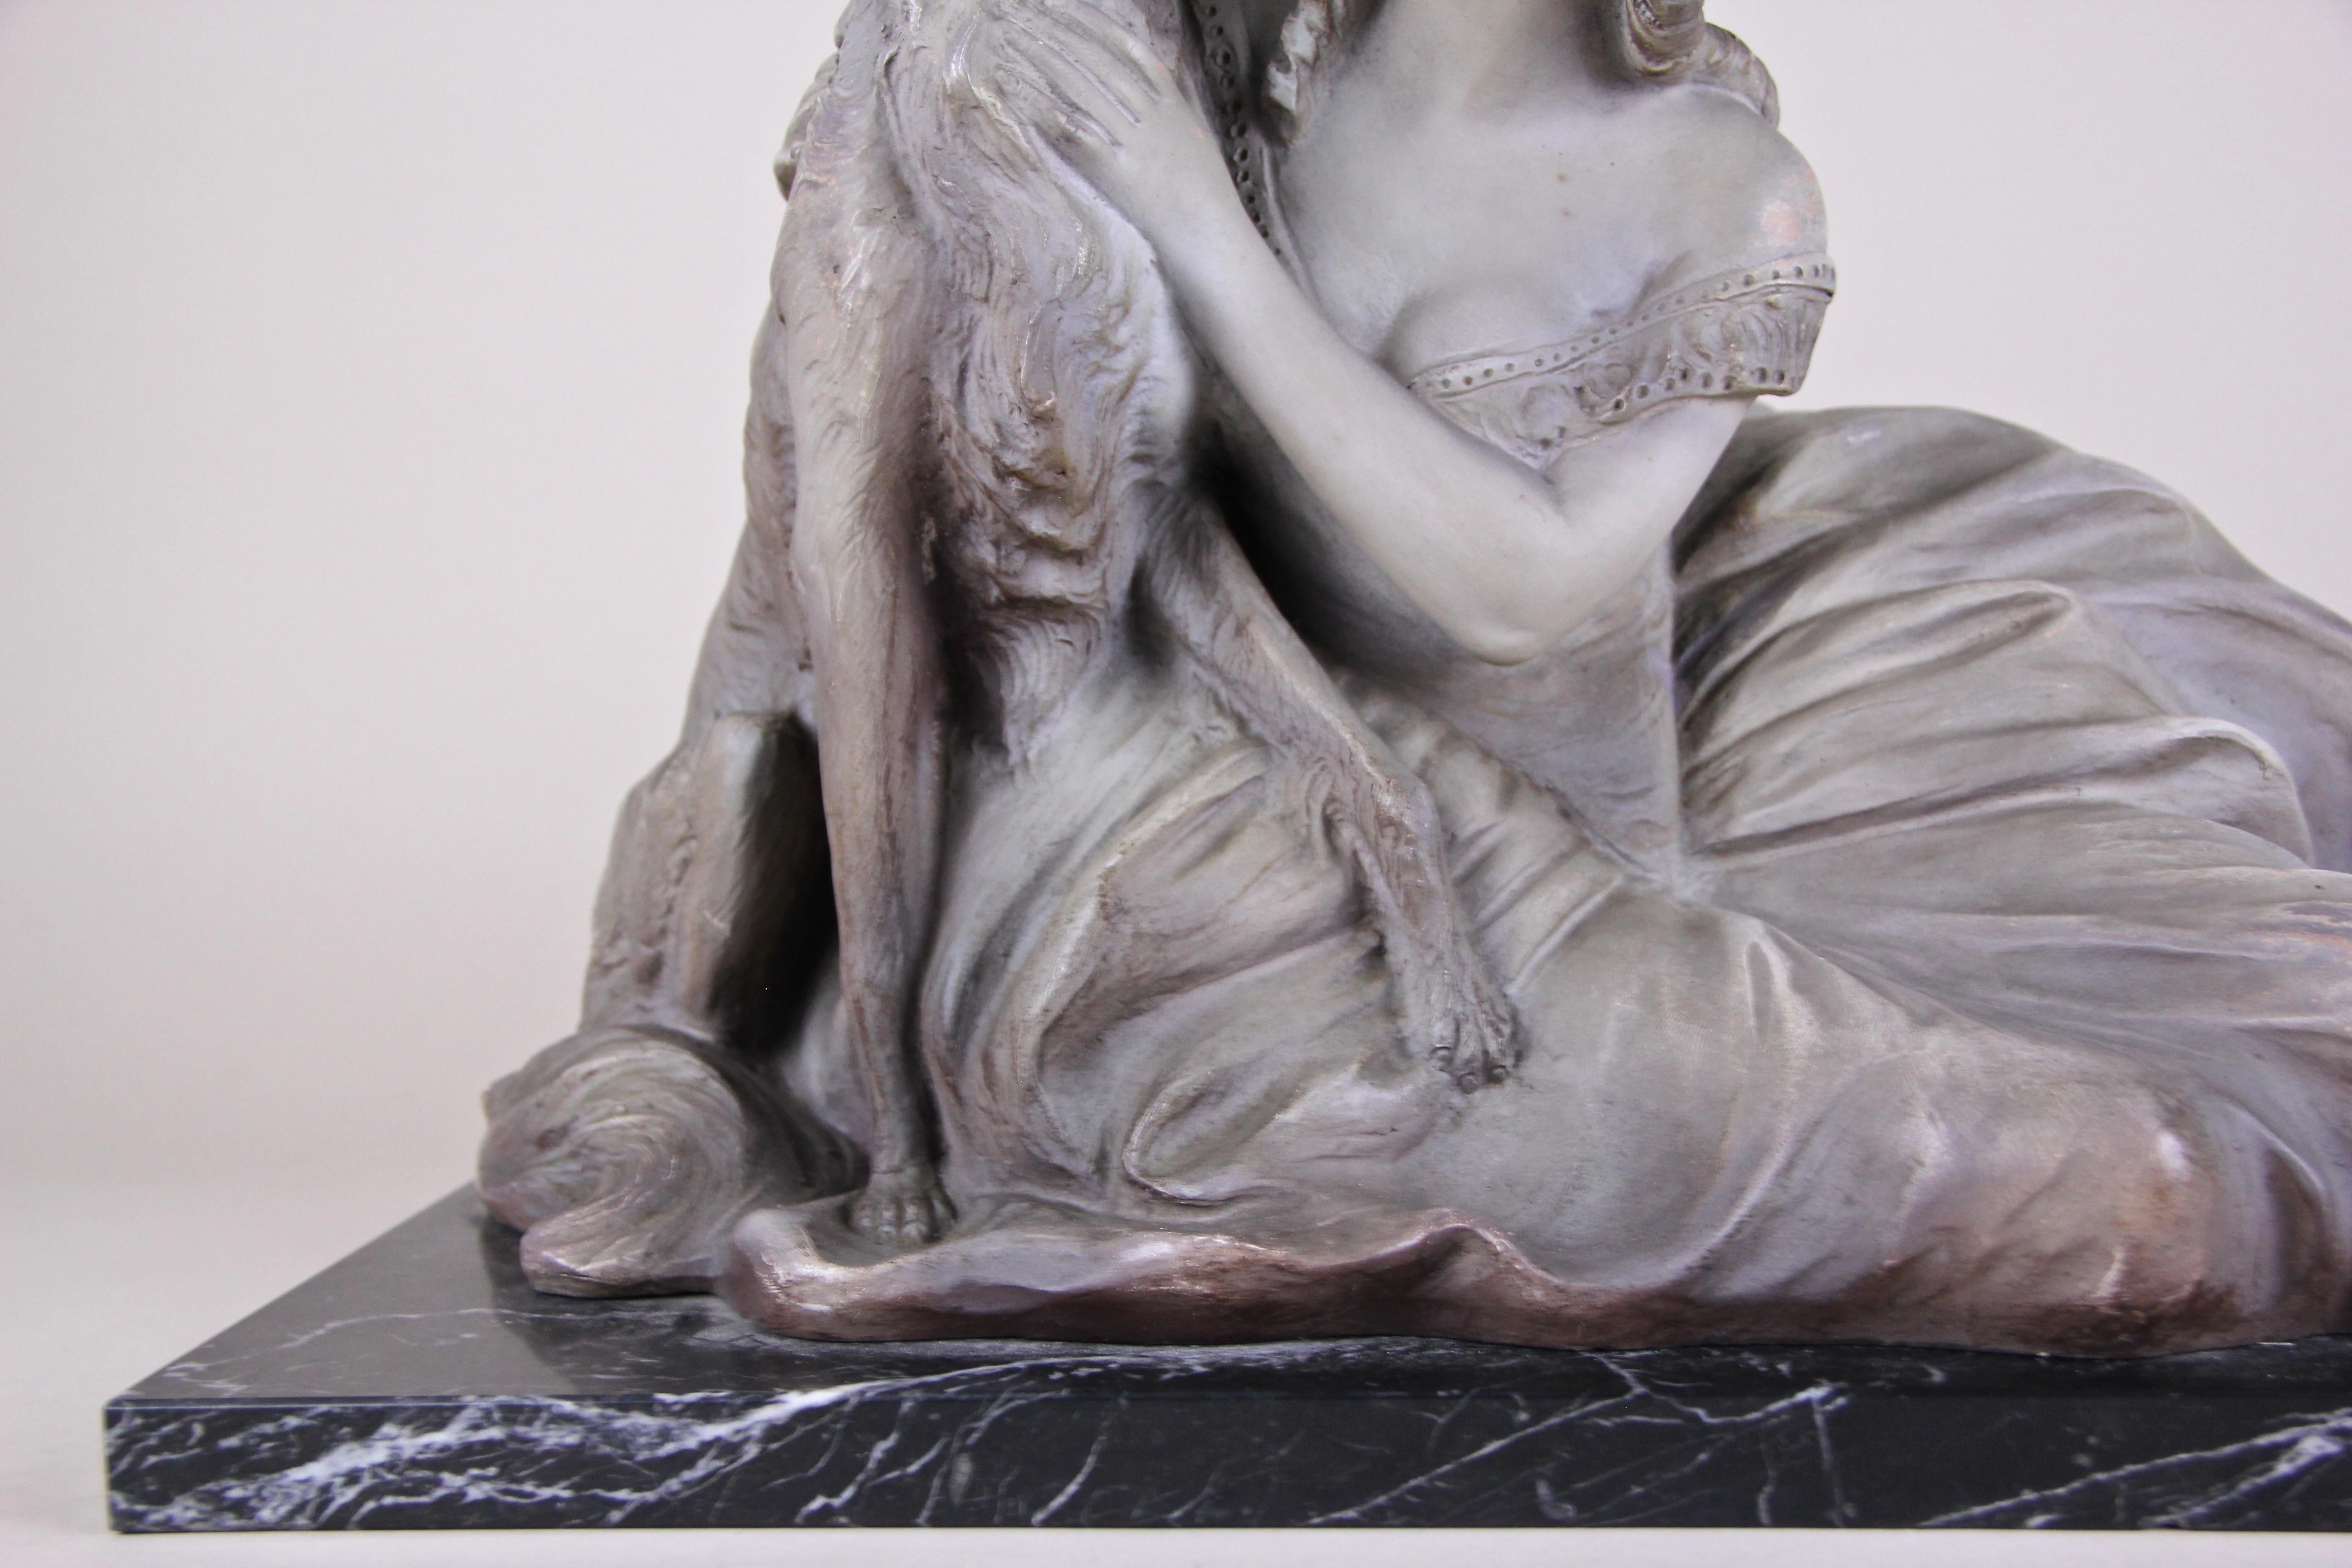 20th Century Art Deco Terracotta Sculpture on Black Marble Base, Signed, France, circa 1920 For Sale